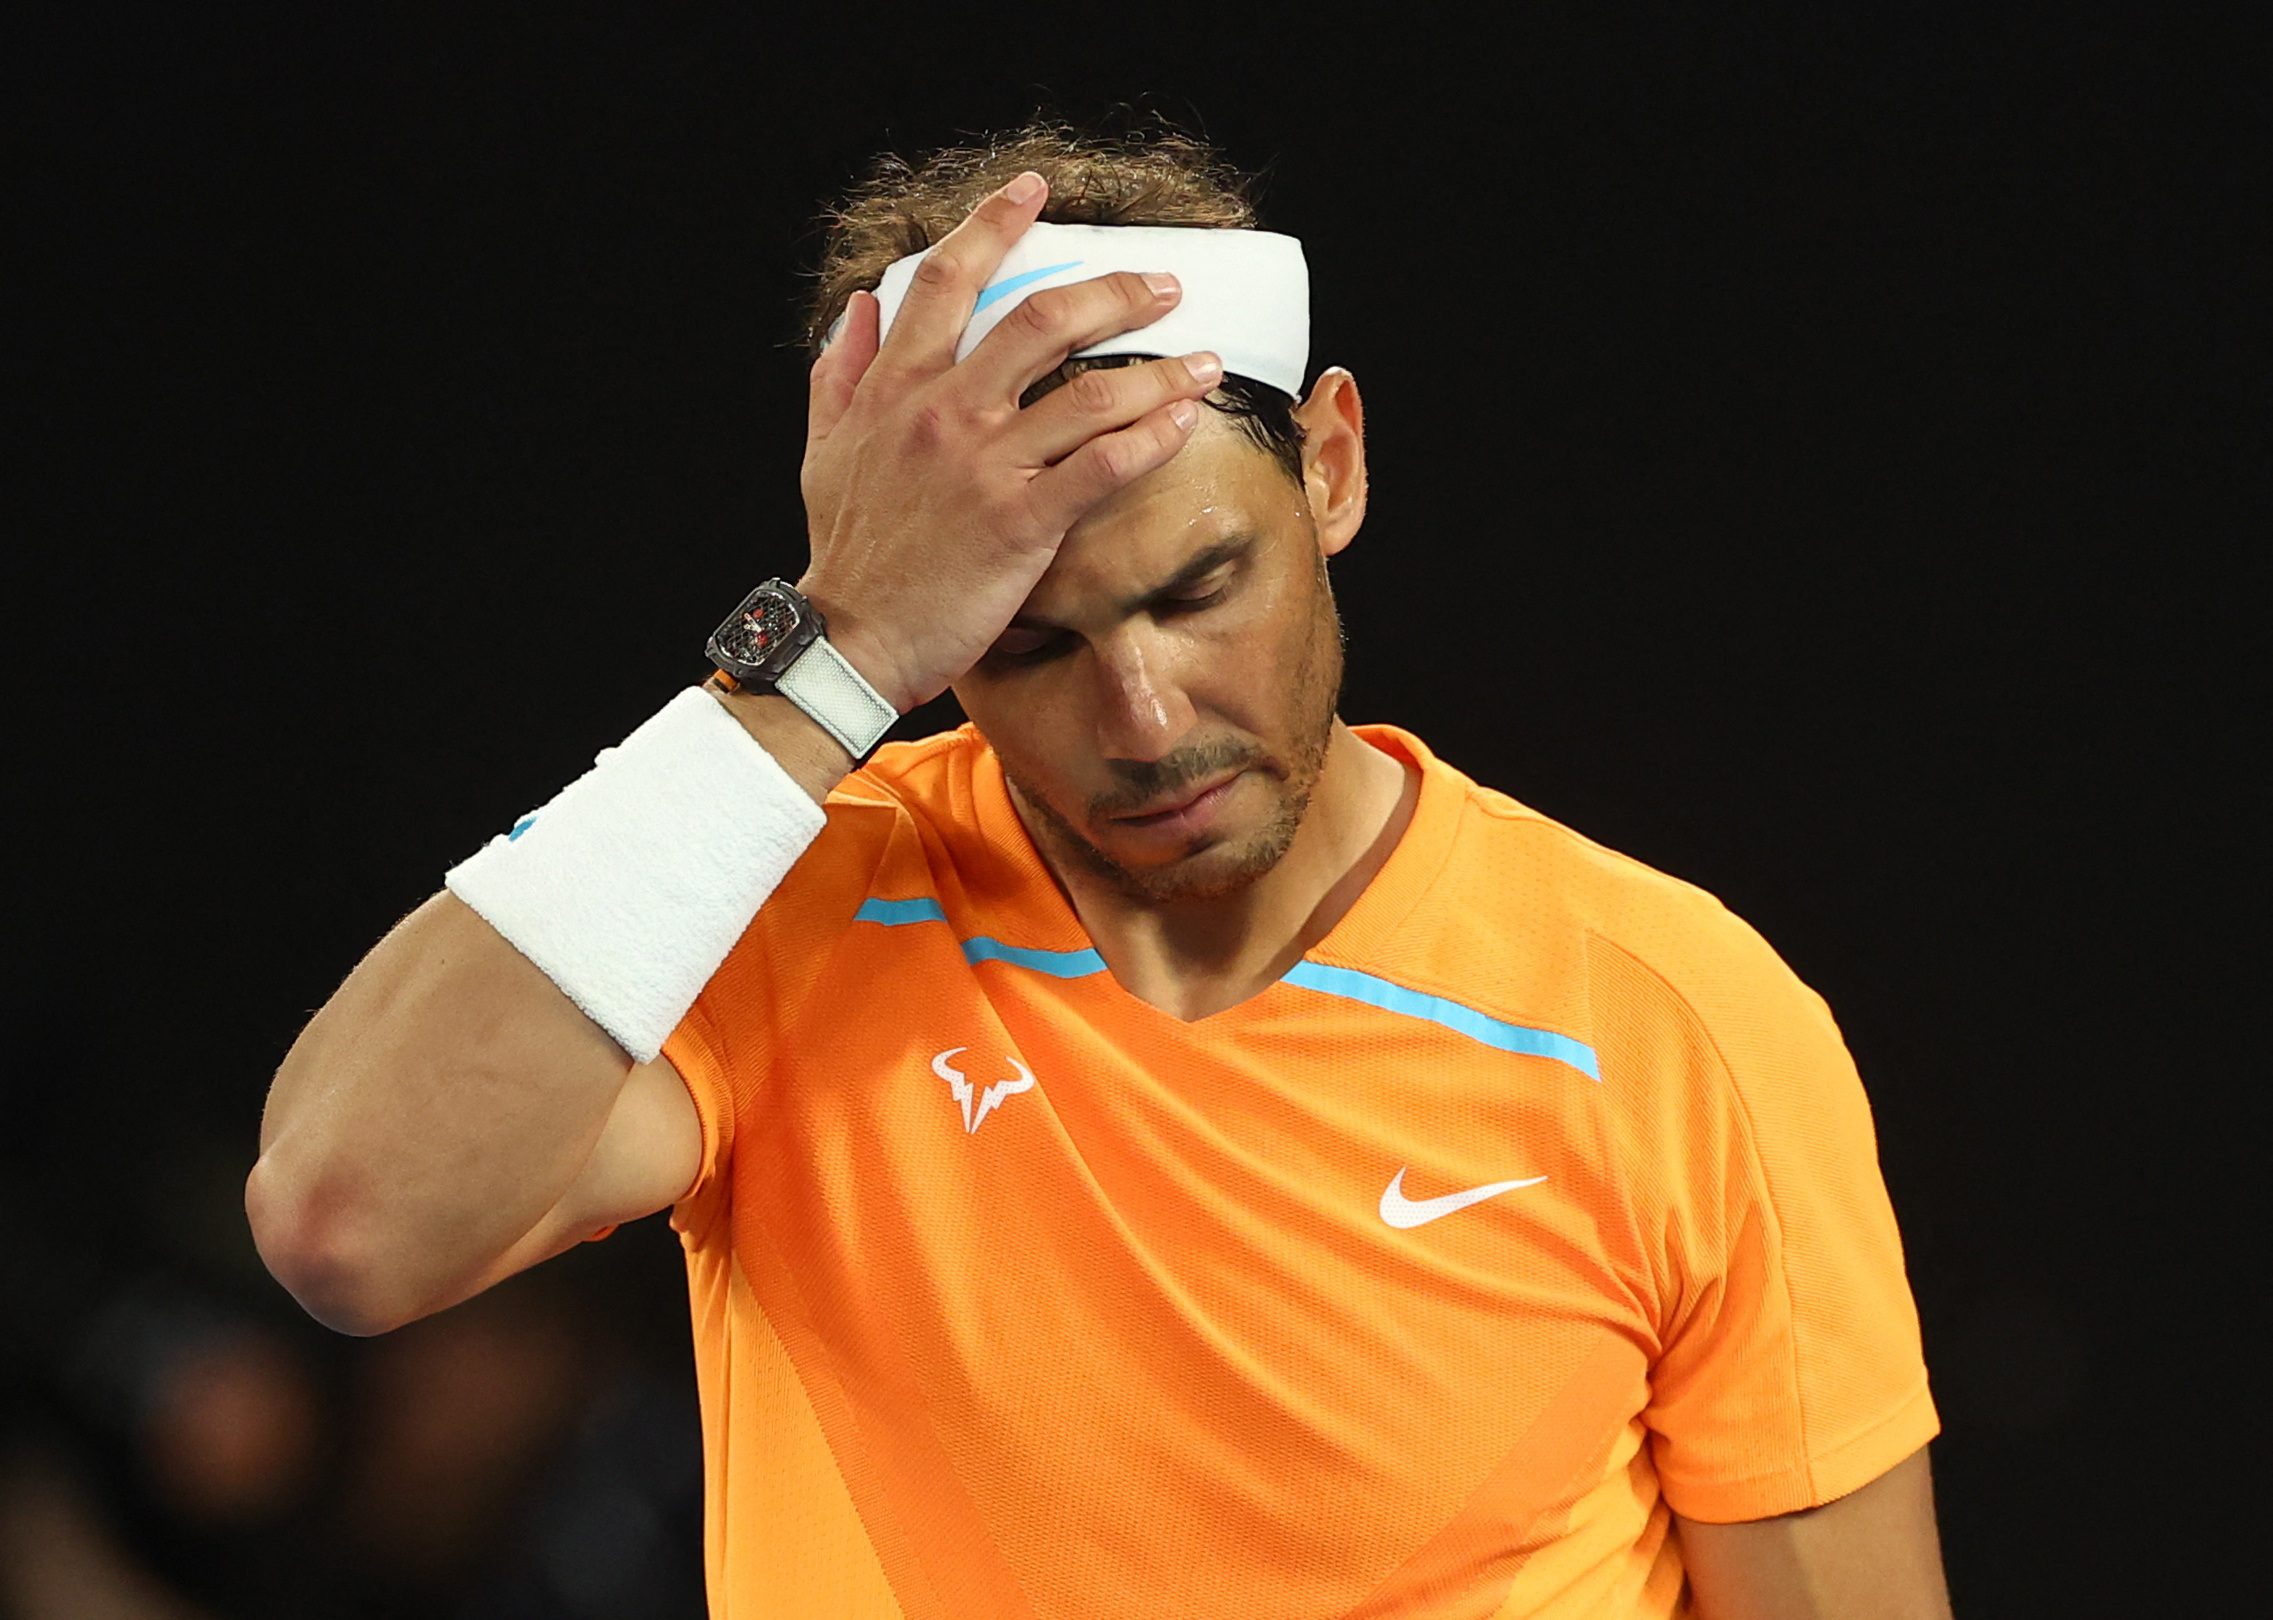 Nadal to skip Australian Open due to fresh muscle injury